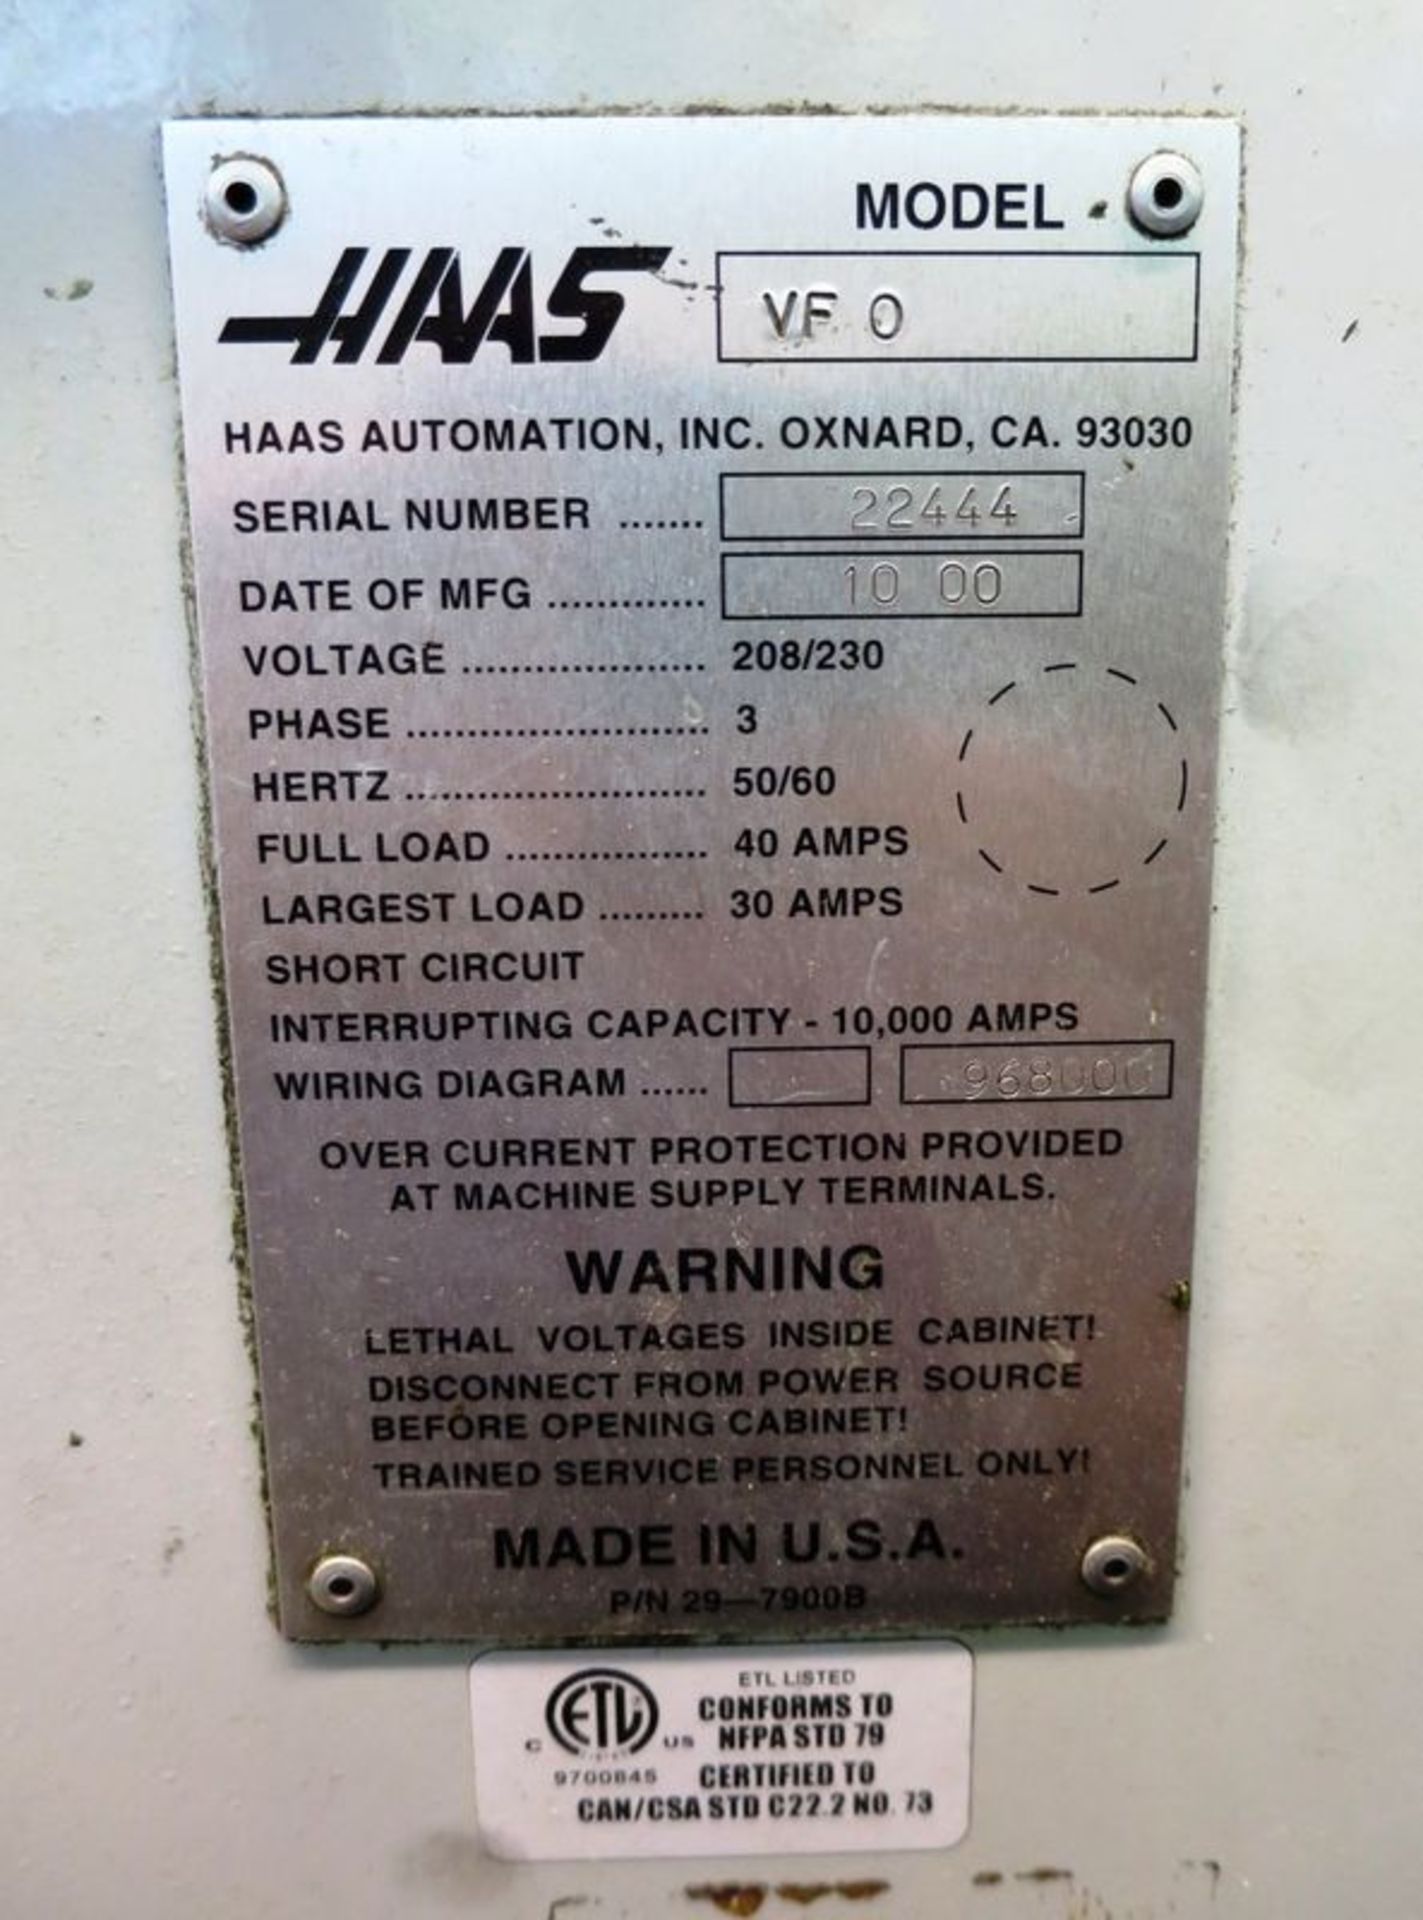 Haas VF-0 4-Axis CNC Vertical Machining Center, S/N 22444, New 2000 - Image 11 of 11